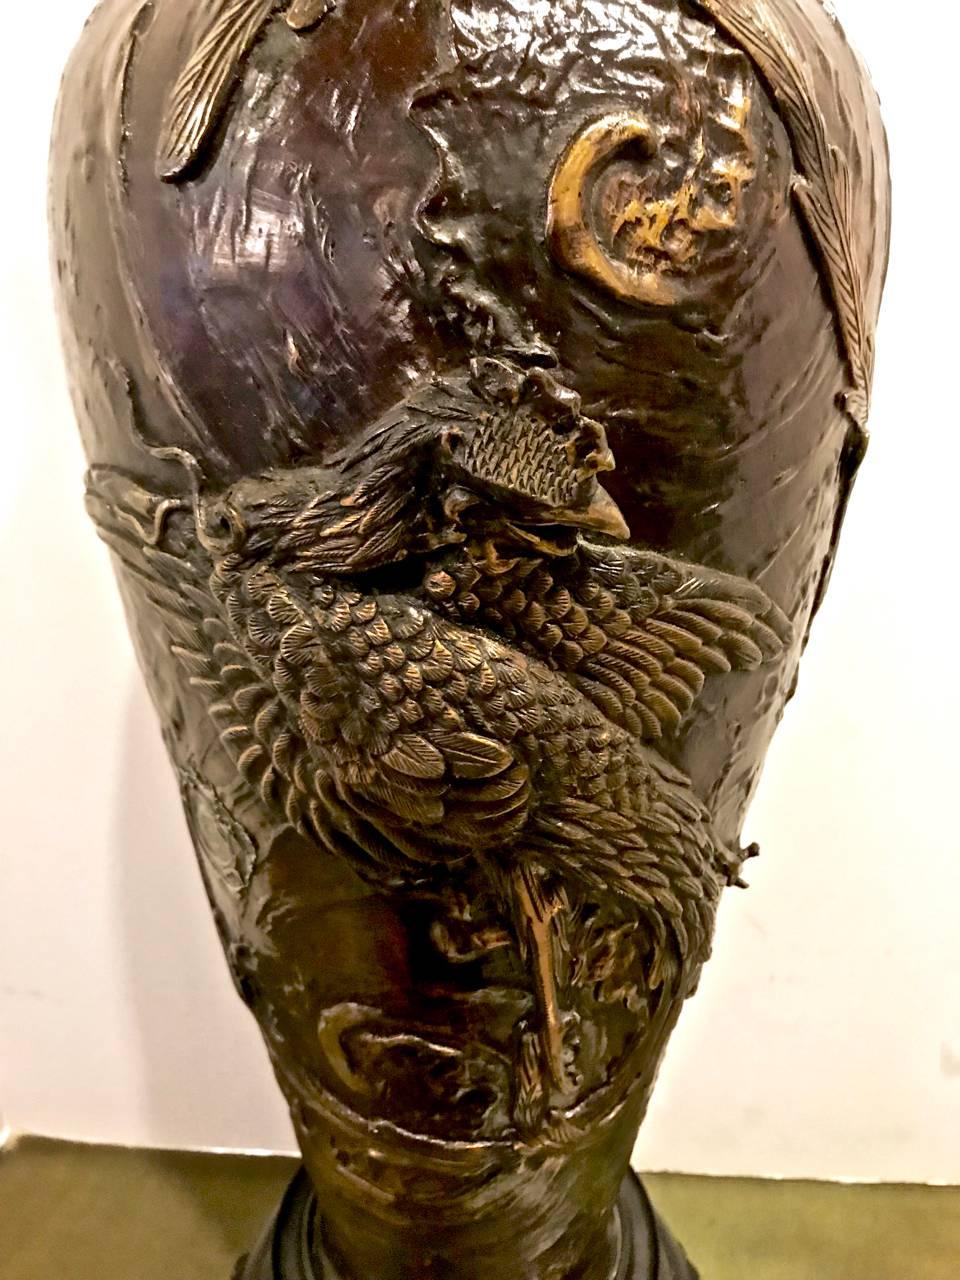 This is an outstanding example of a large Japanese Meiji period bronze vase now mounted as a lamp. The vase is cast with high relief and finely detailed cockerels and flaming pearls. Every detail is finely cast and hand chased in mixed metals. 